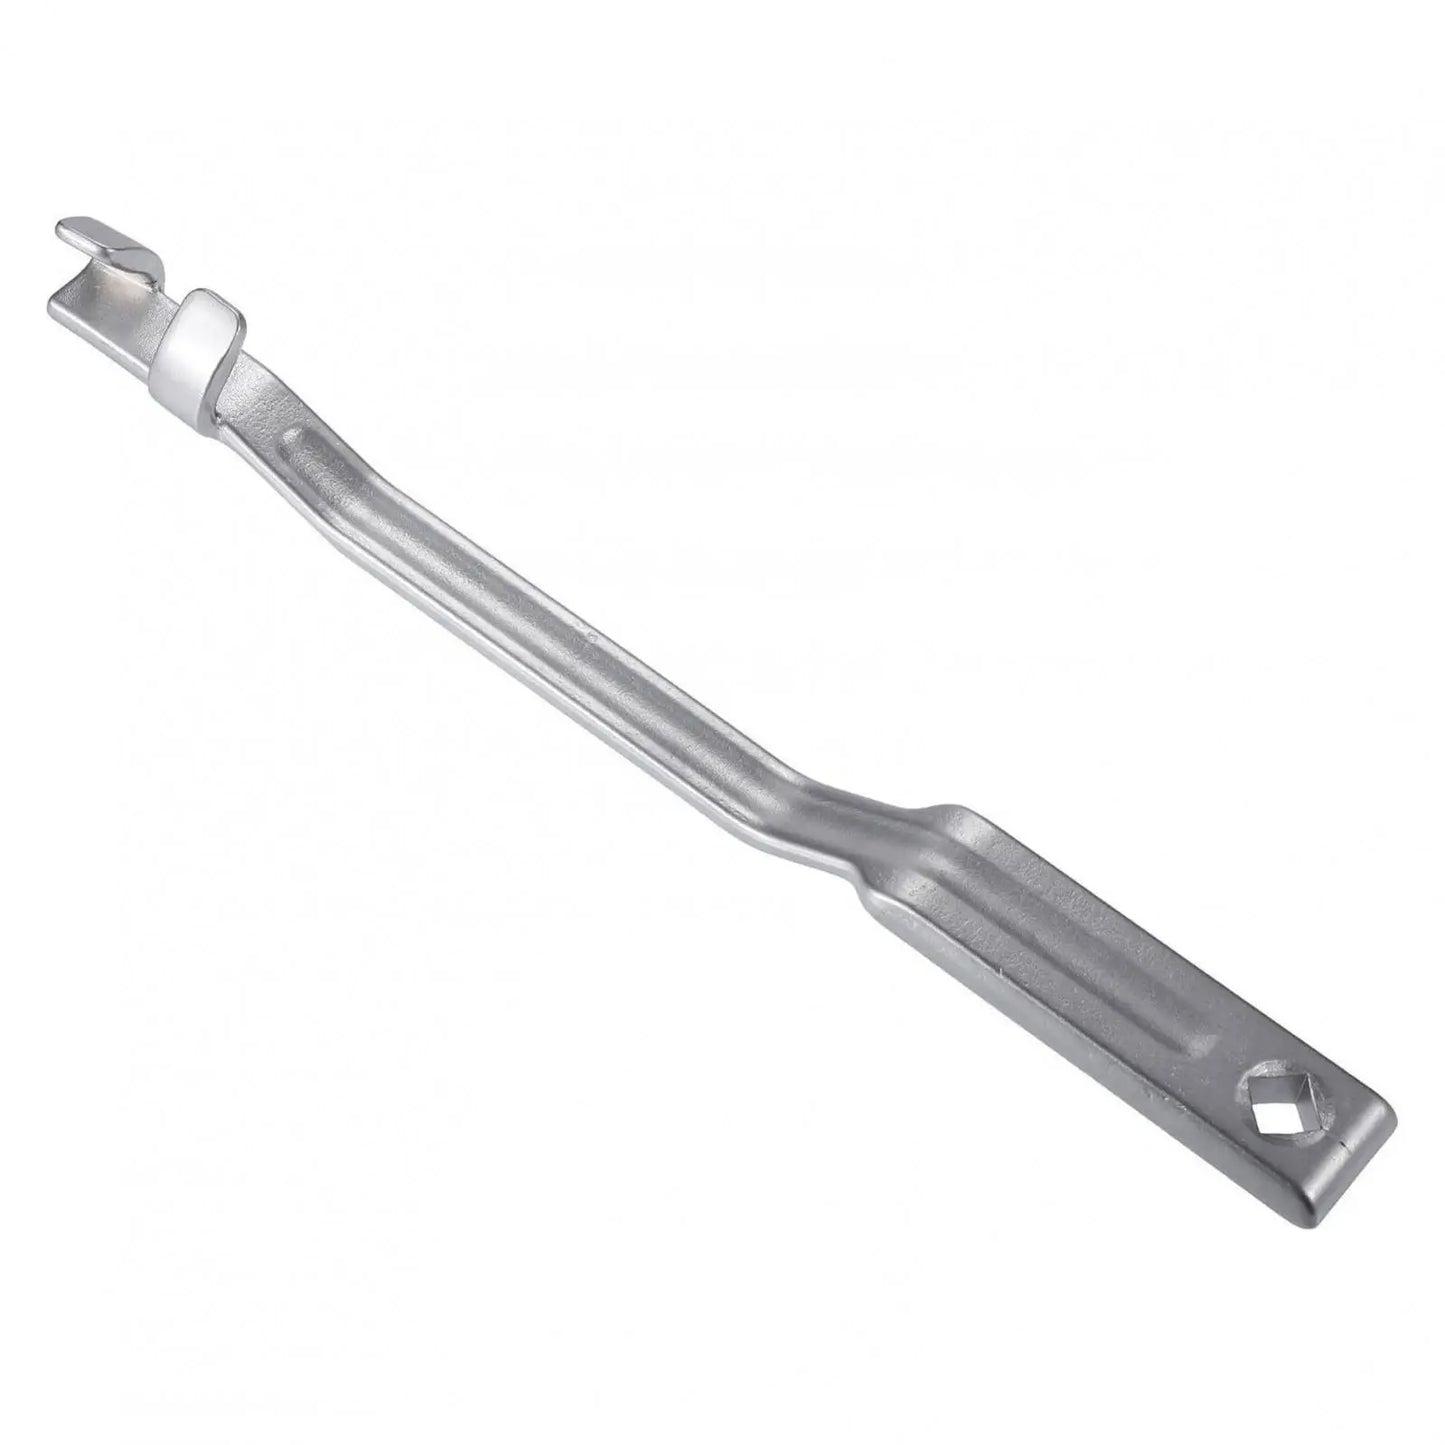 13.4 Inch Long Wrench Extension for Mechanics with 1/2 Inch Square Hole